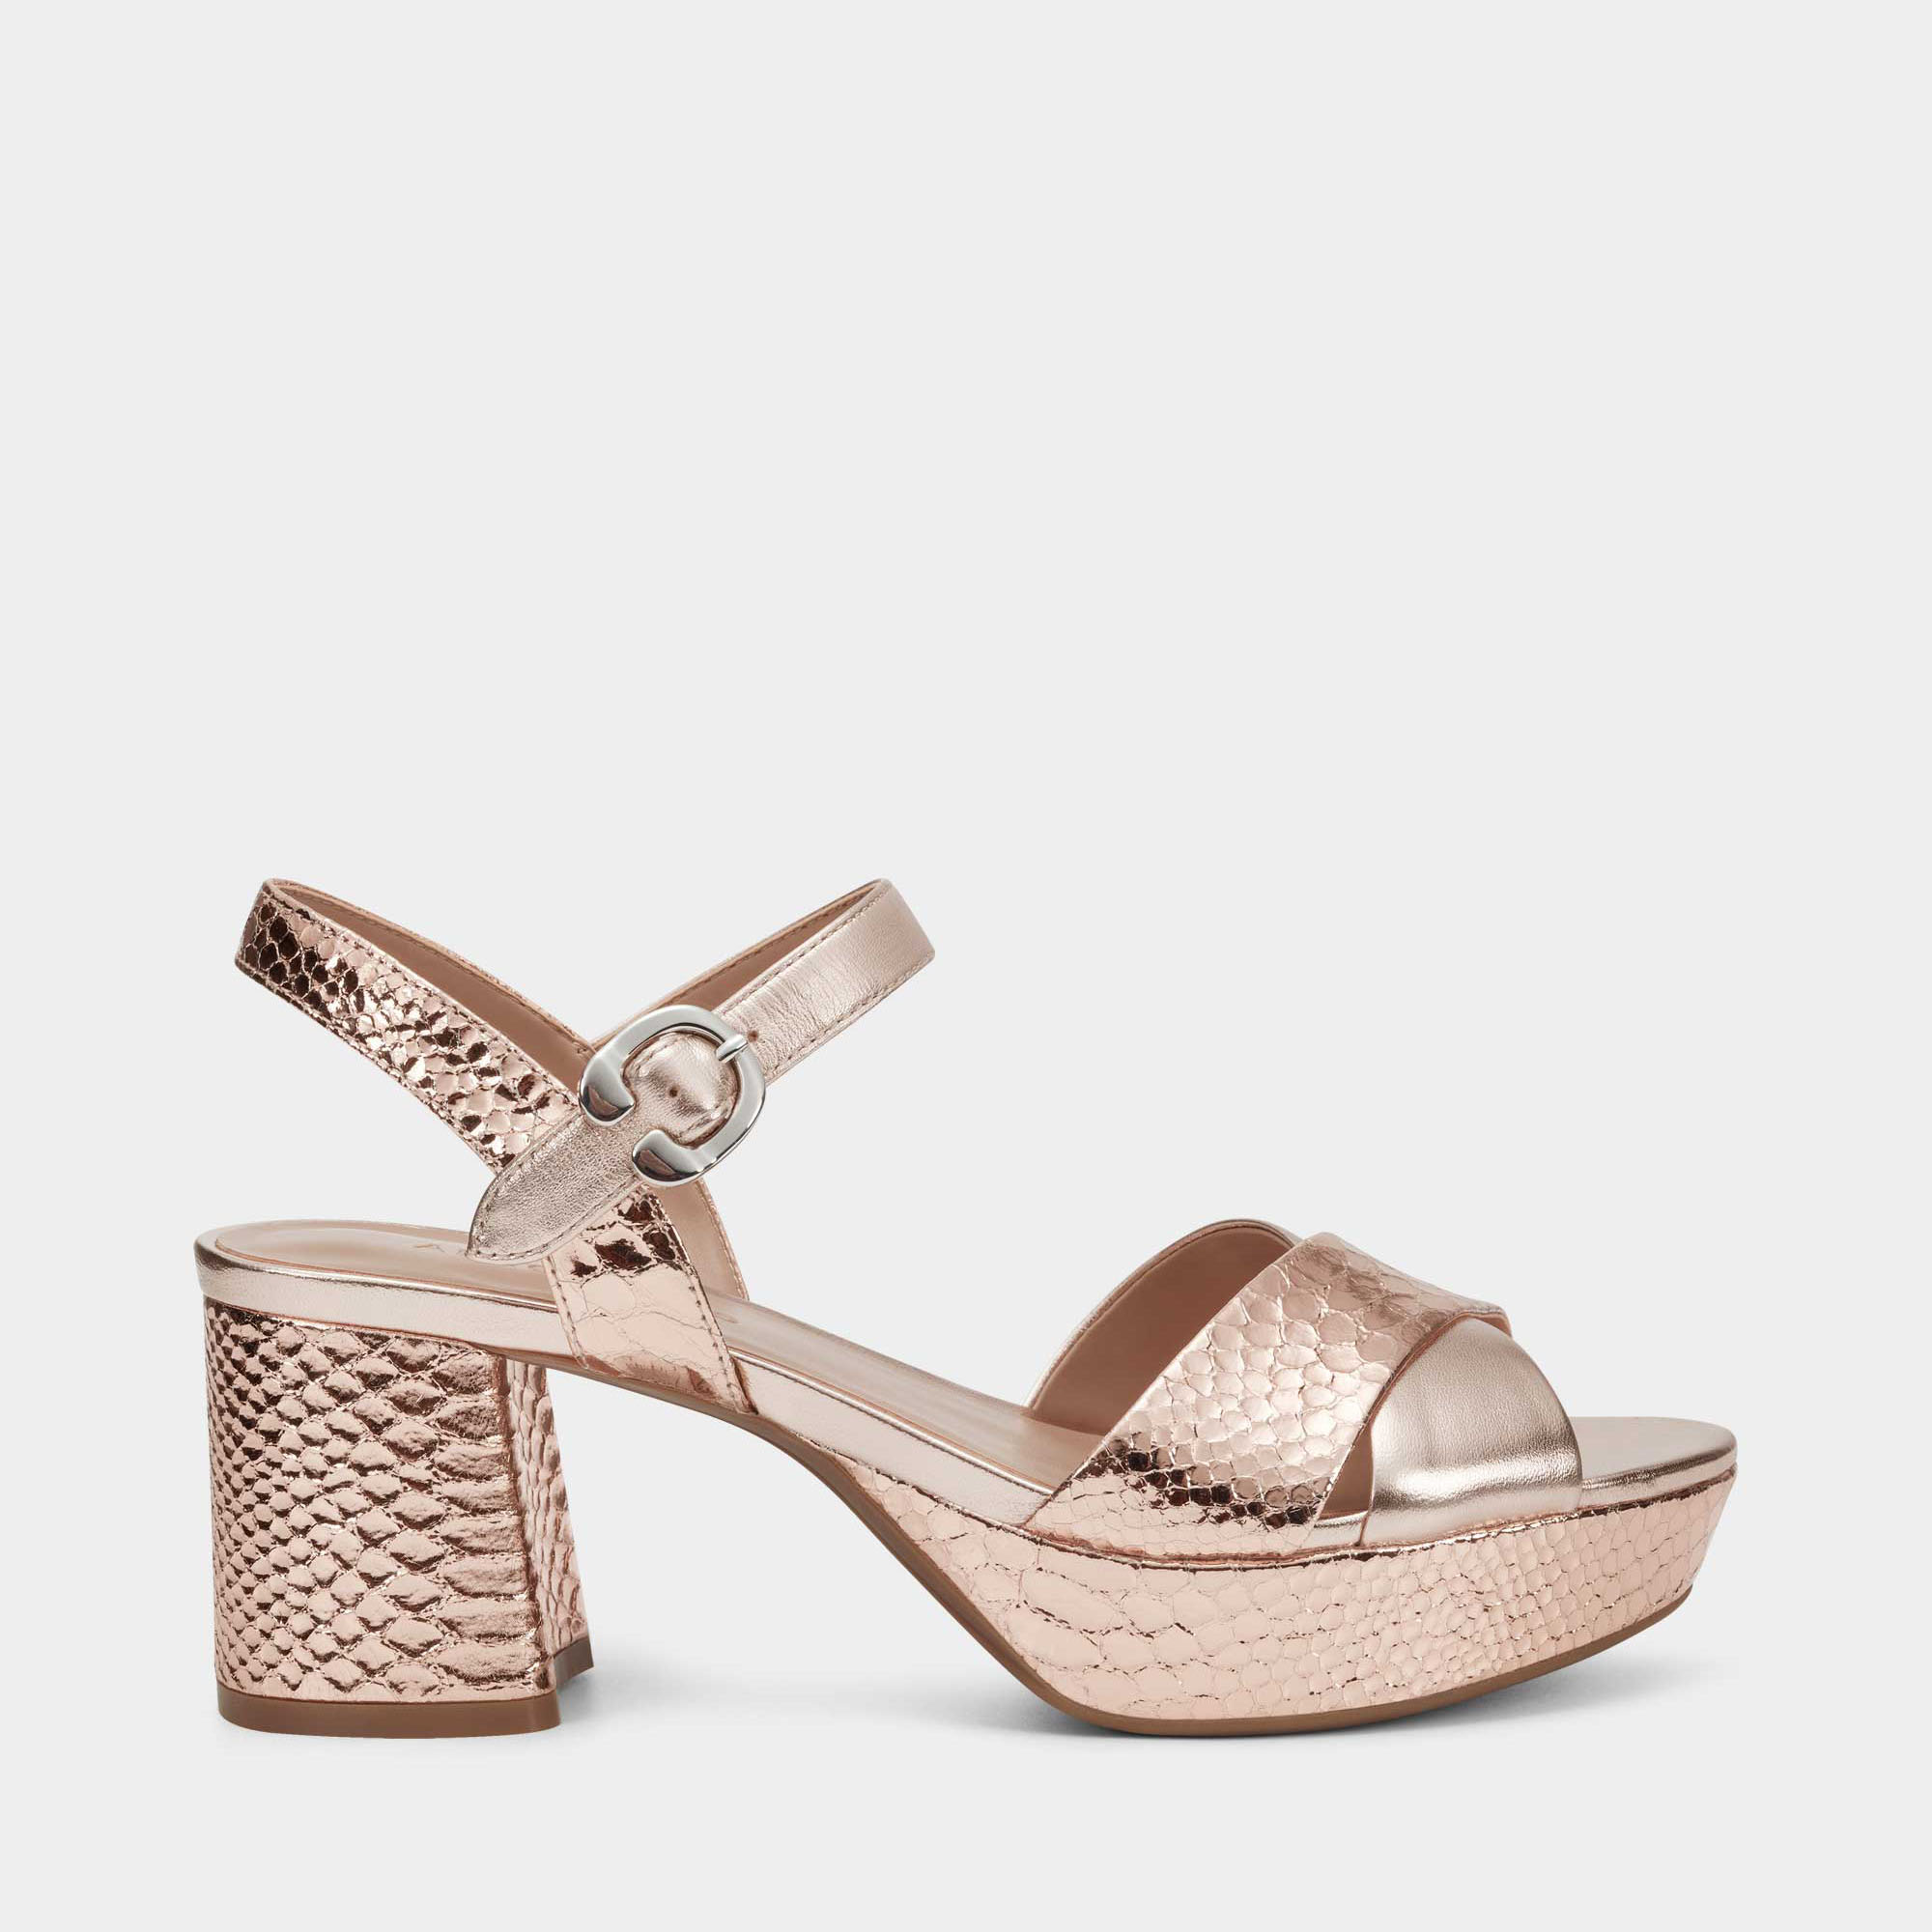 Cosmos Sandal in Rose Gold Leather